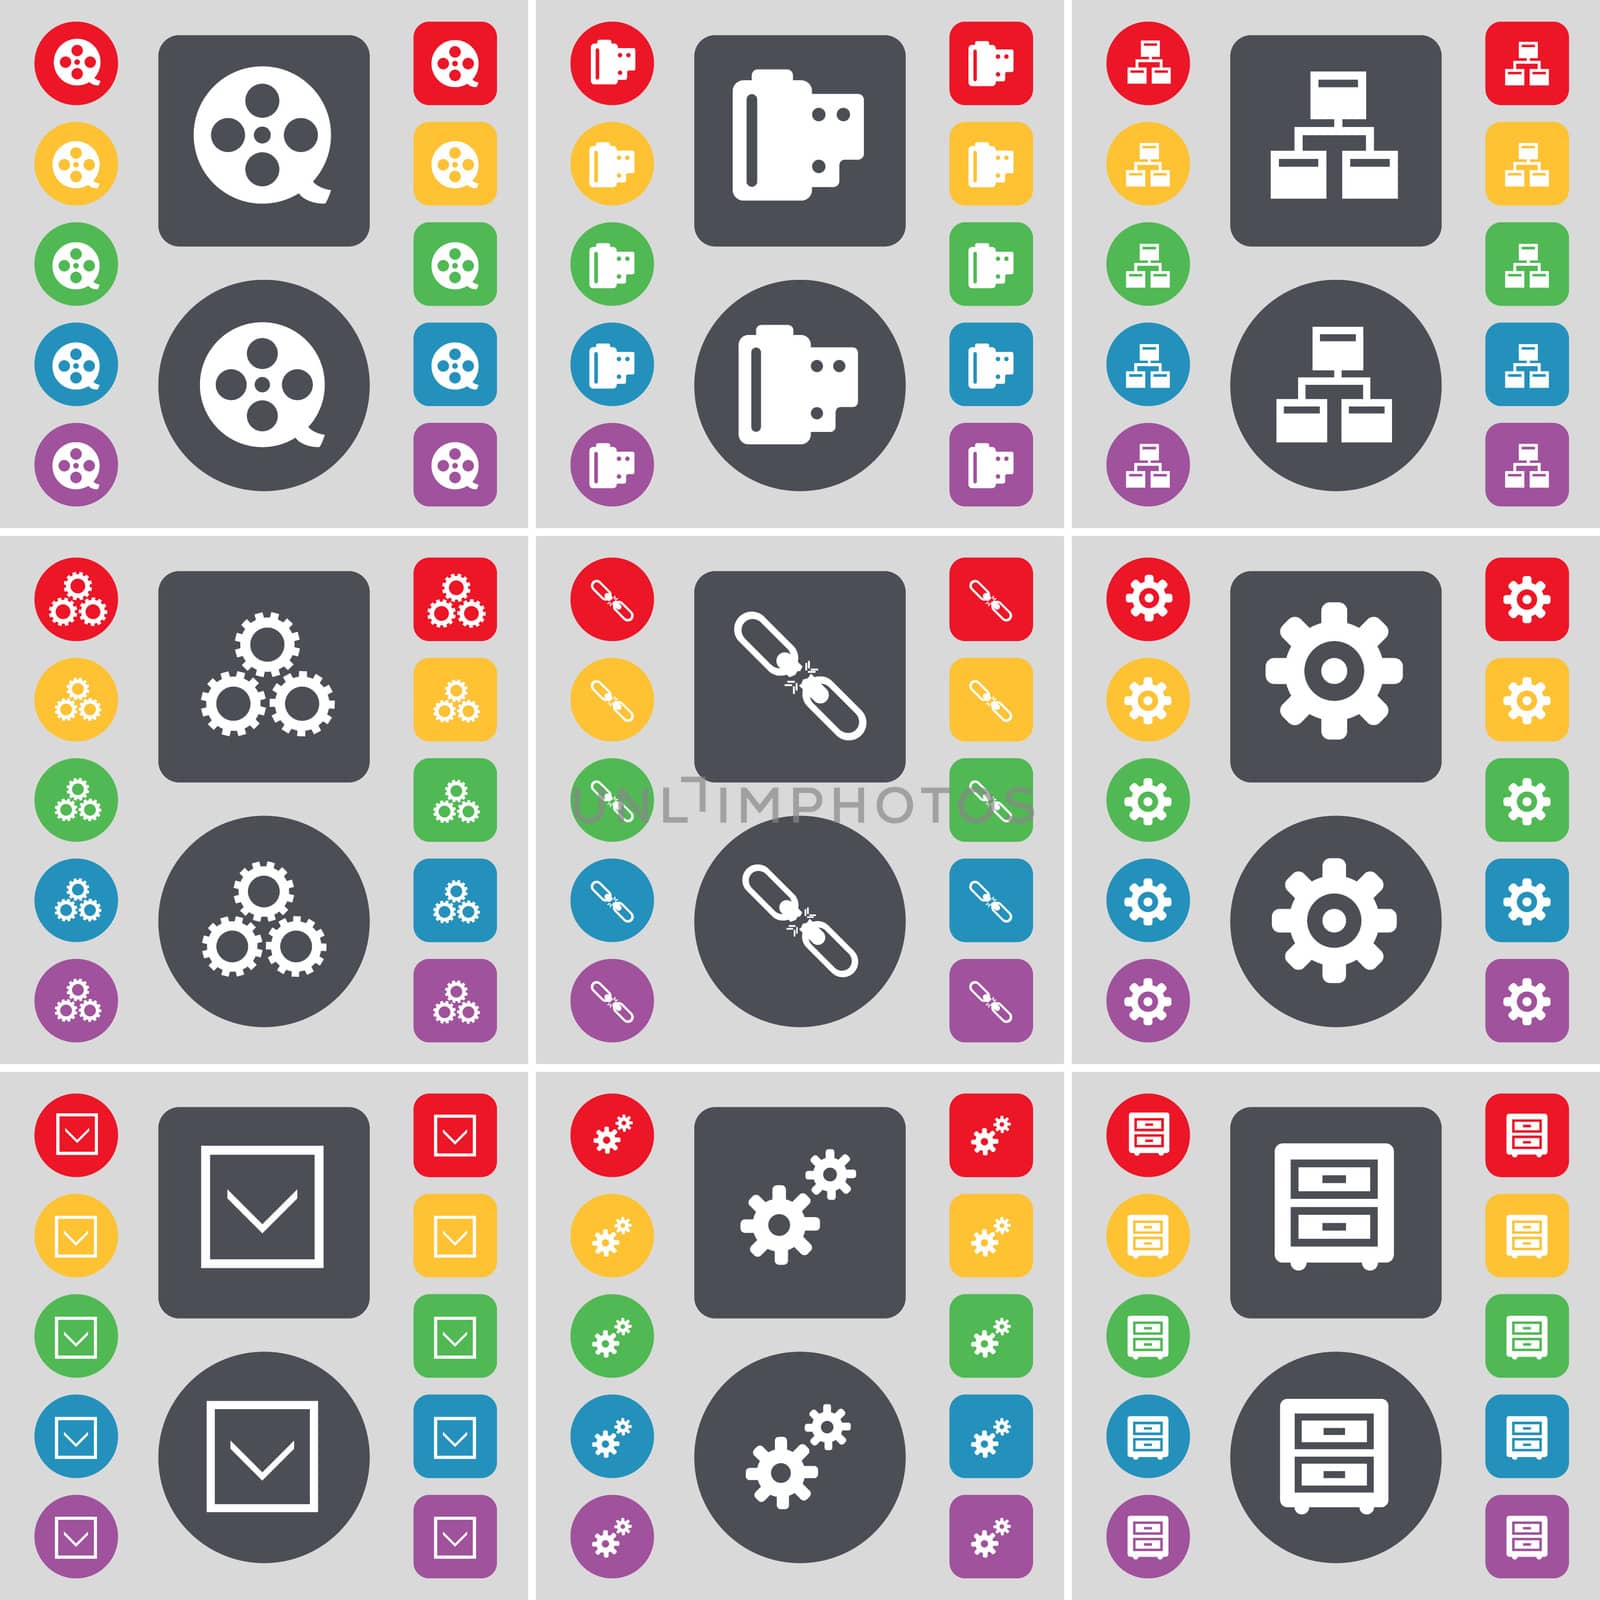 Videotape, Negative films, Network, Gear, Link, Gear, Arrow down, Bed-table icon symbol. A large set of flat, colored buttons for your design. illustration